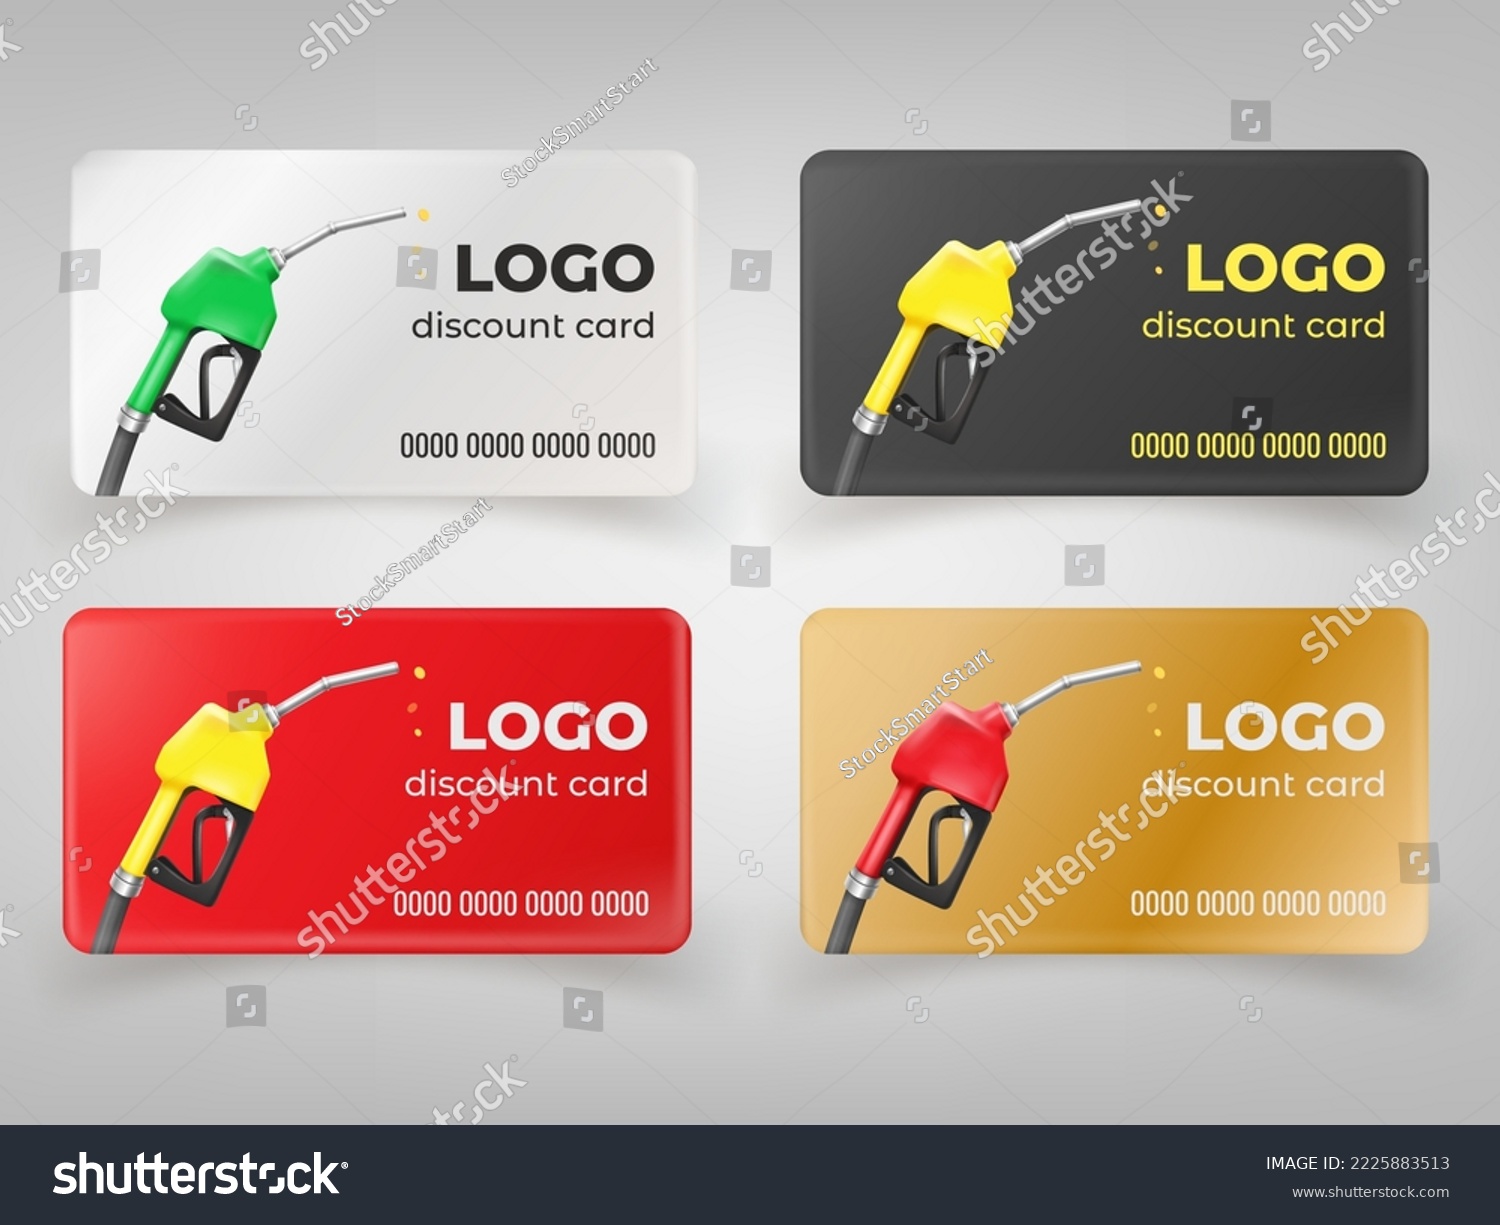 SVG of Fuel discount cards. 3d refuel gift coupon, gasoline voucher on free petrol fueling diesel vehicle or auto oil, bank card template of gas station service, tidy vector illustration of fuel discount svg